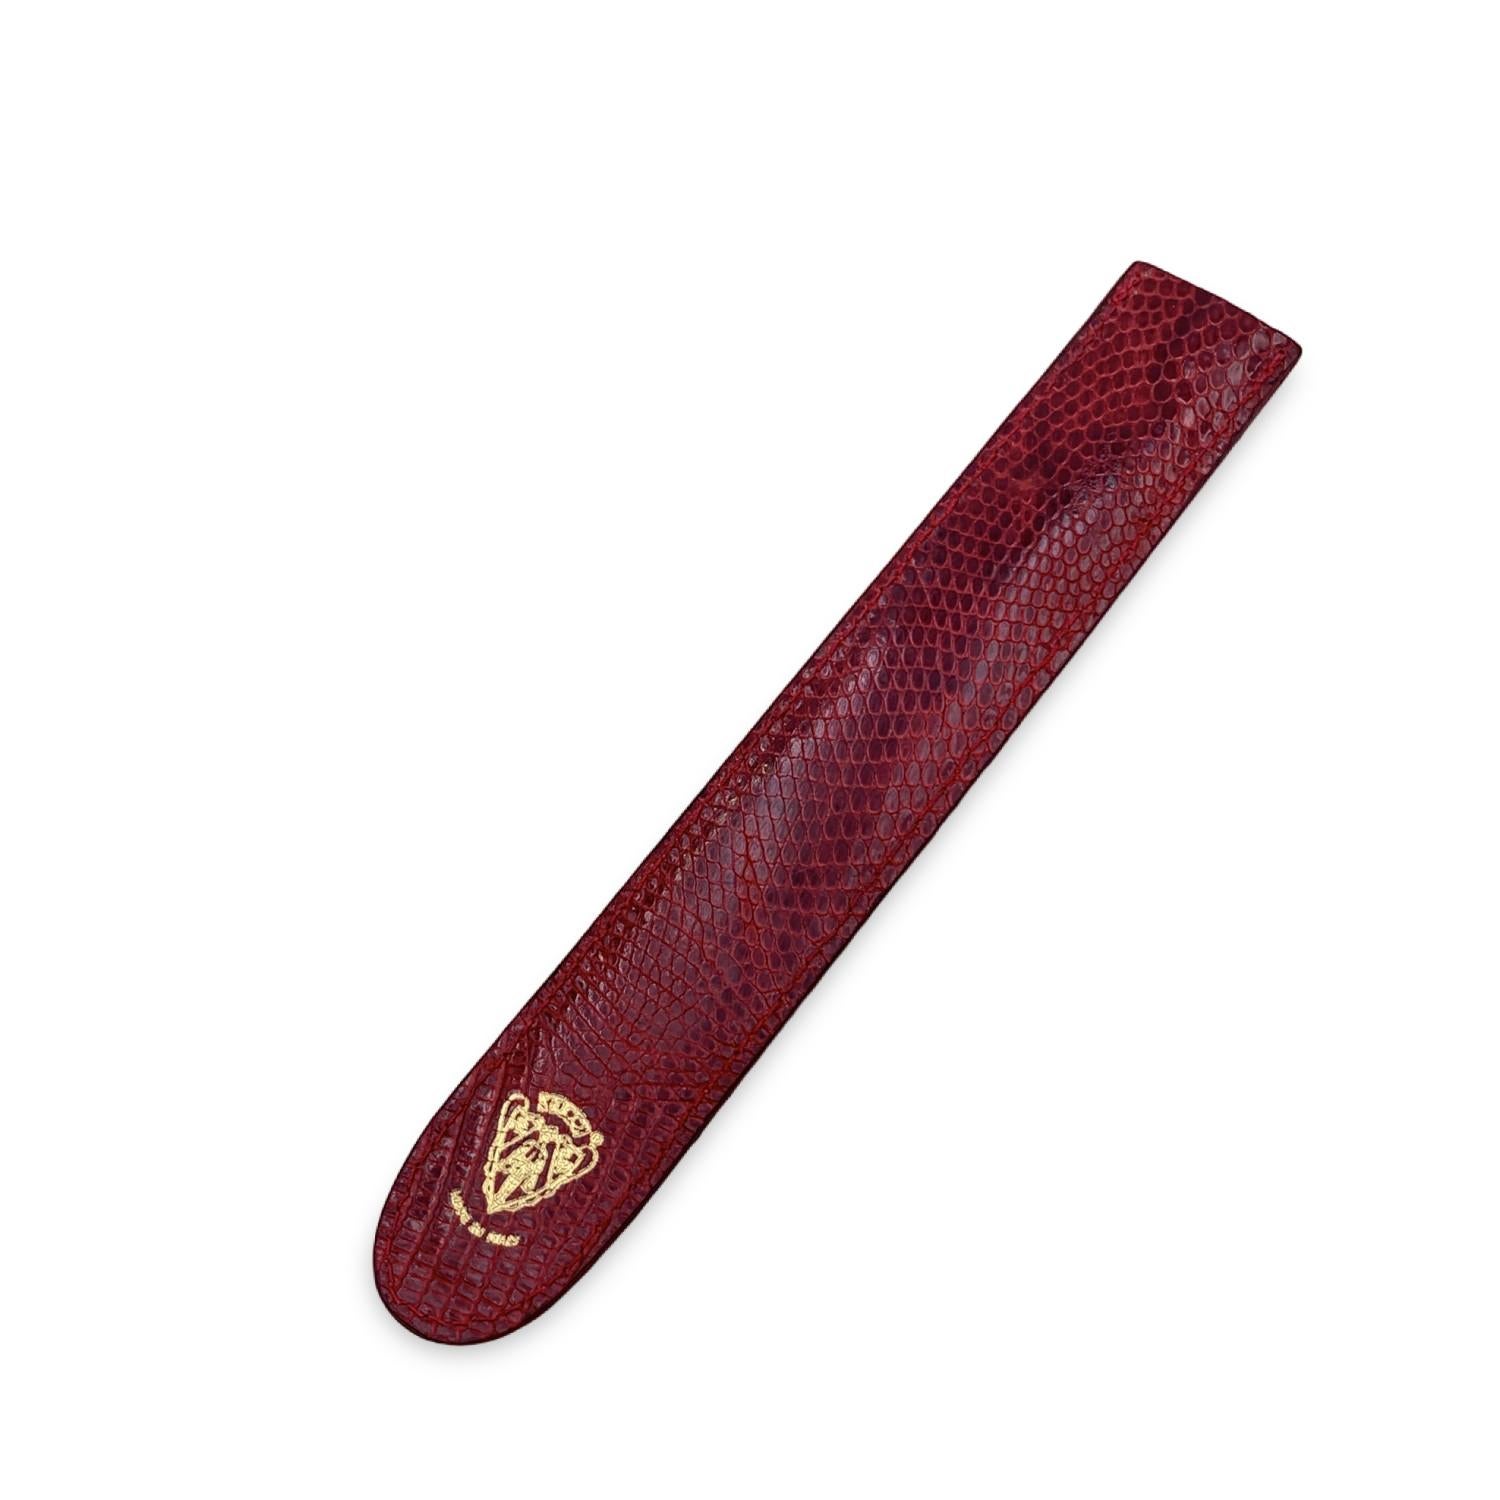 Vintage Gucci Letter opener or bookmark in gold metal with GG logo on the clip. Red leather holder/case. Total lenght: 6 inches - 15.2 cm. 'Gucci Made in Italy' crest embossed on the reverse of the leather case.

Details

MATERIAL: Metal

COLOR: